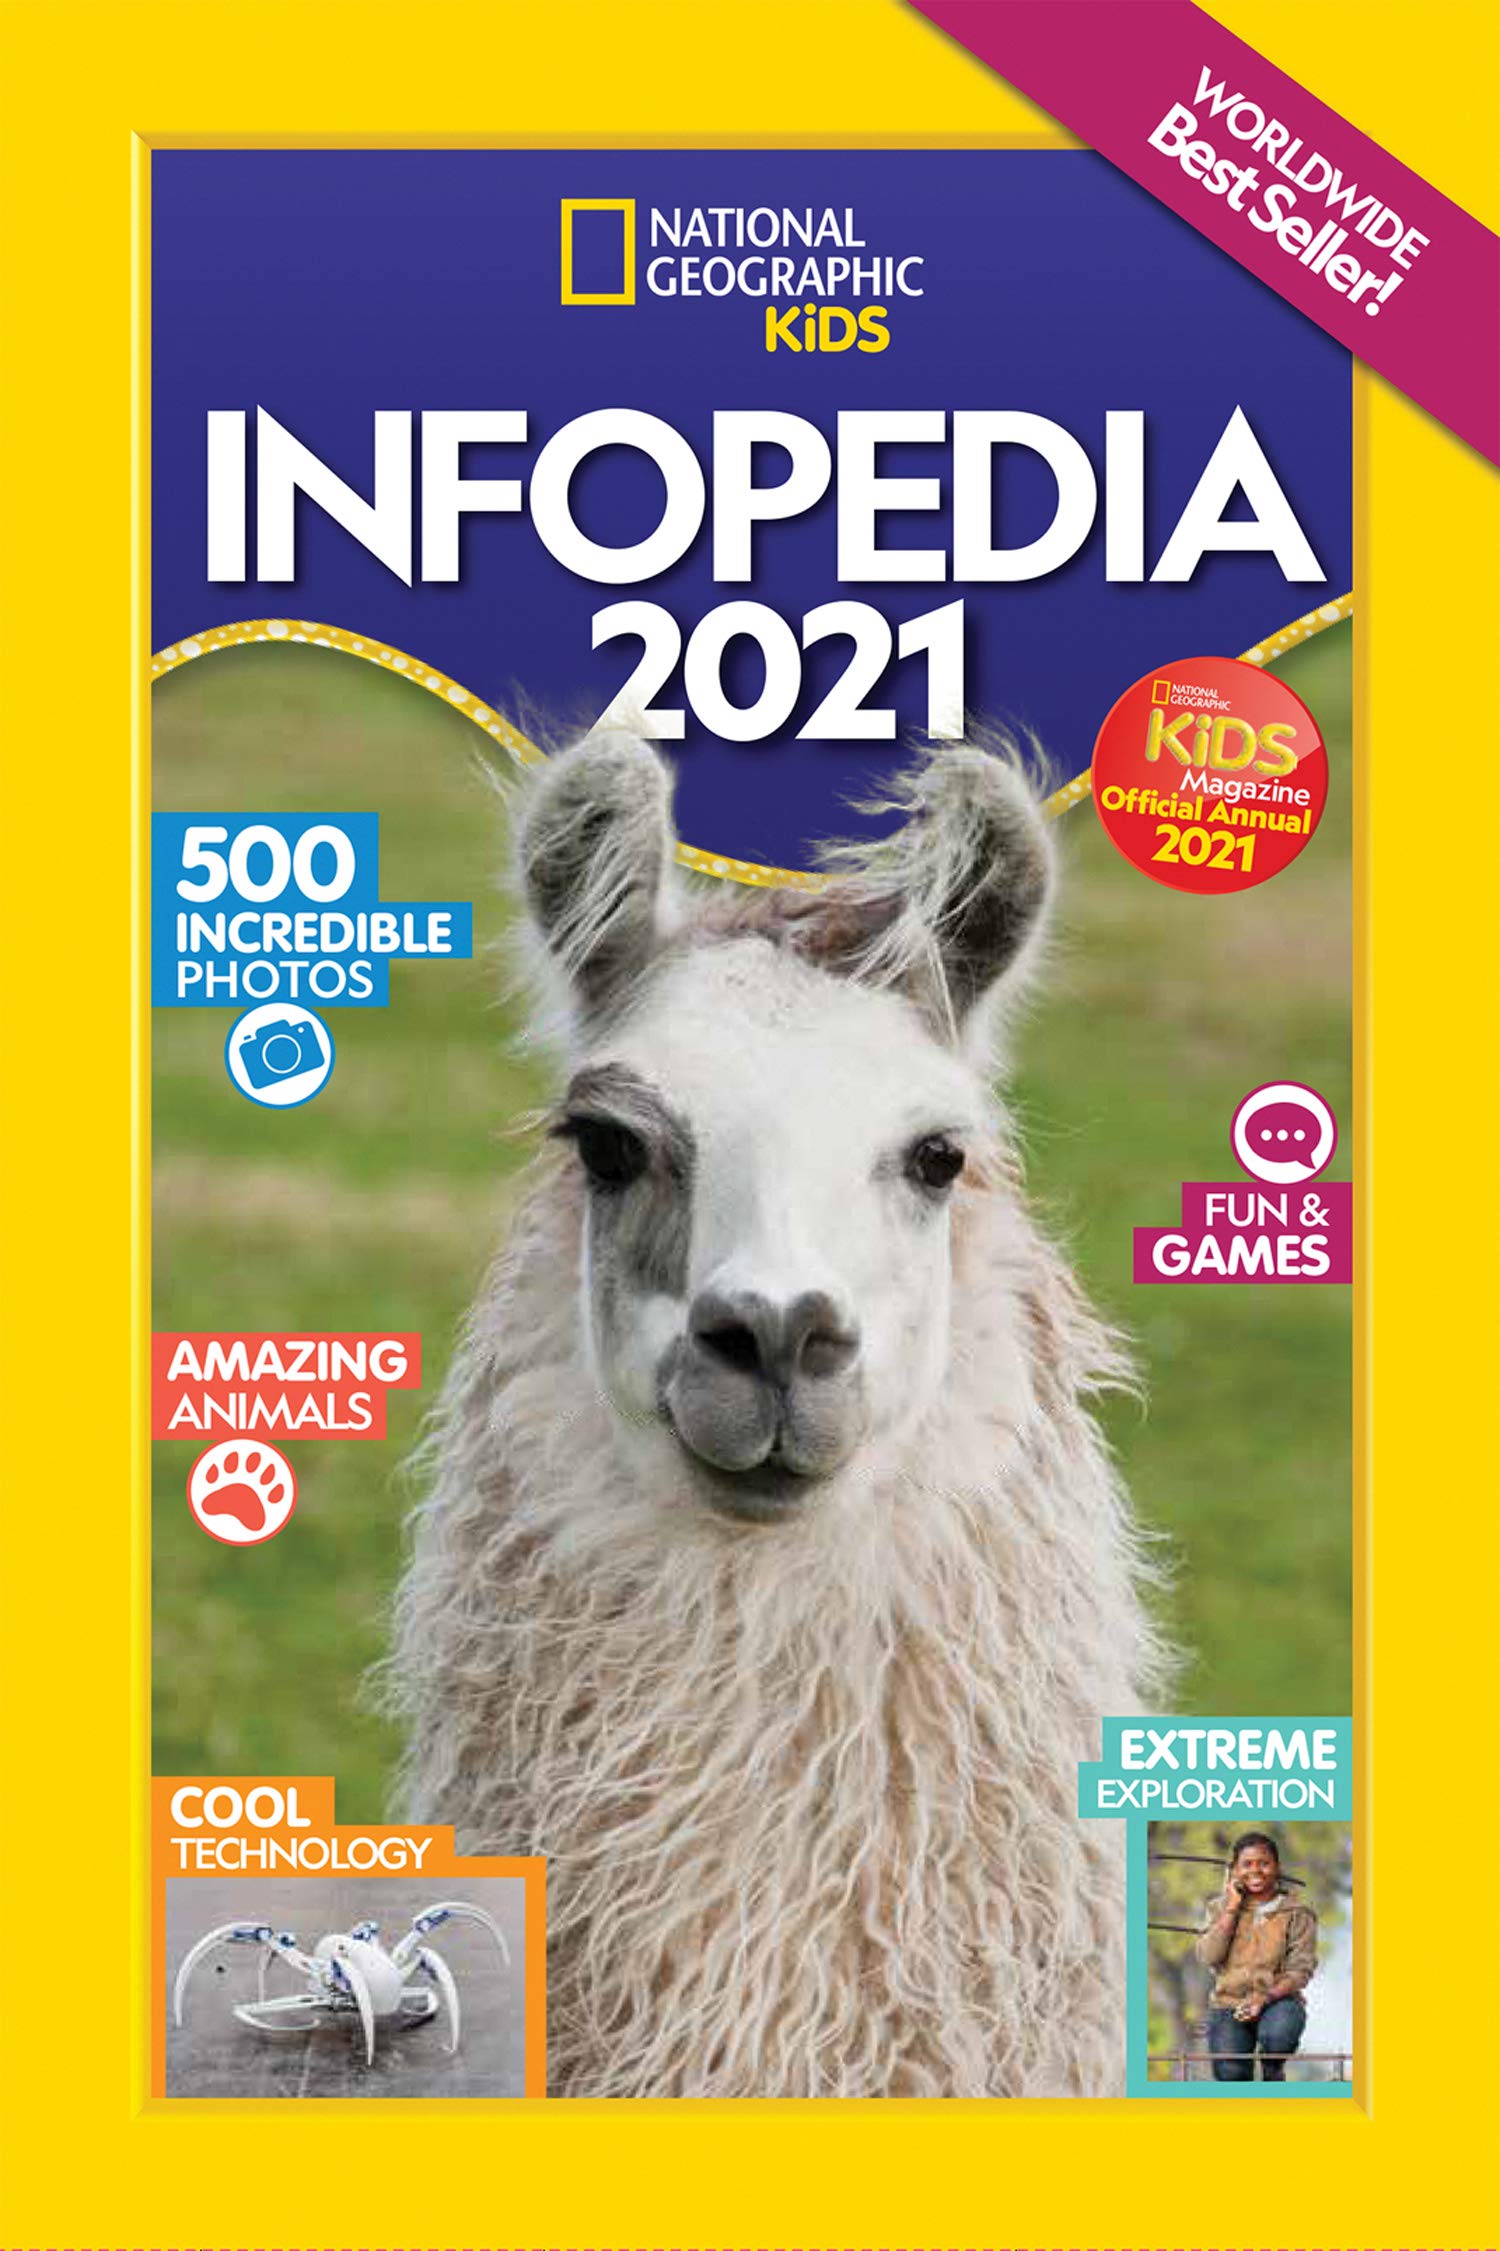 The 2021National Geographic Kids’ Infopedia